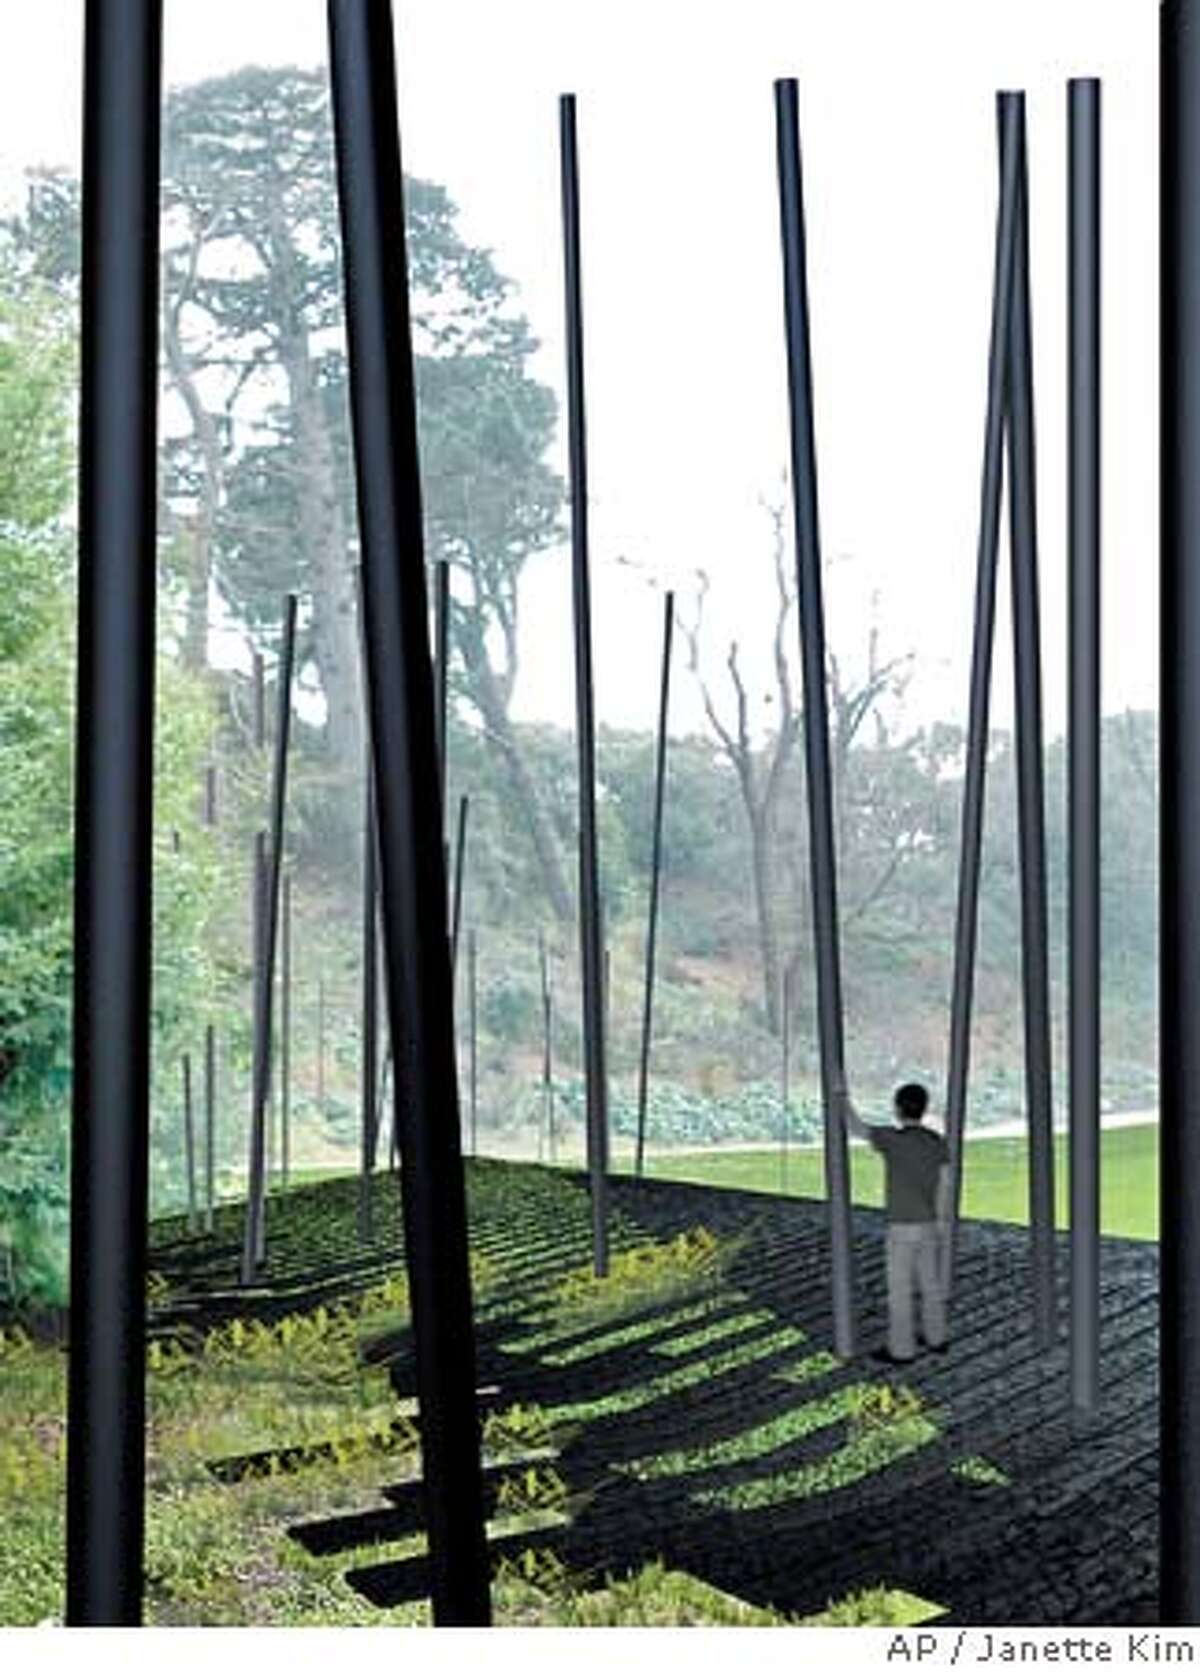 This is an undated artist rendition provided by architects Janette Kim and Chloe Town who won the National AIDS Memorial Design Competition. "Living Memorial," the winning entry by Kim and Town, features a stand of black carbon fiber trees, a charred wood deck and a burned, bark-like walkway that in time will sprout greenery elements borrowed from a fire-scarred forest to evoke a sense of loss and renewal. (AP Photo/Janette Kim, Chloe Town, HO) MAGS OUT